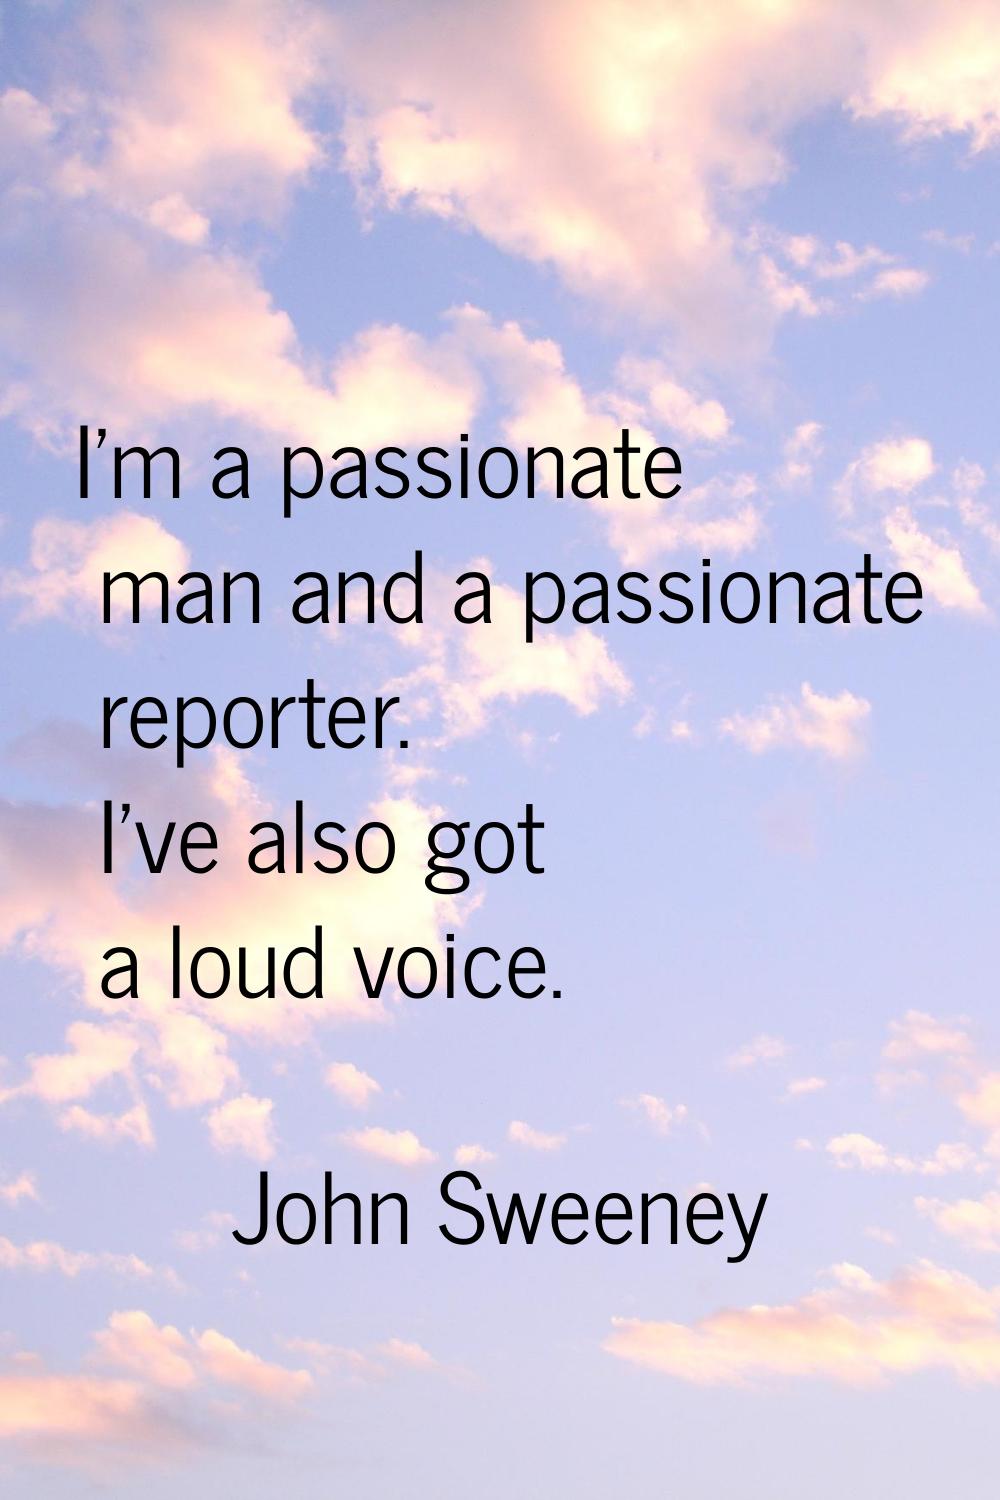 I'm a passionate man and a passionate reporter. I've also got a loud voice.